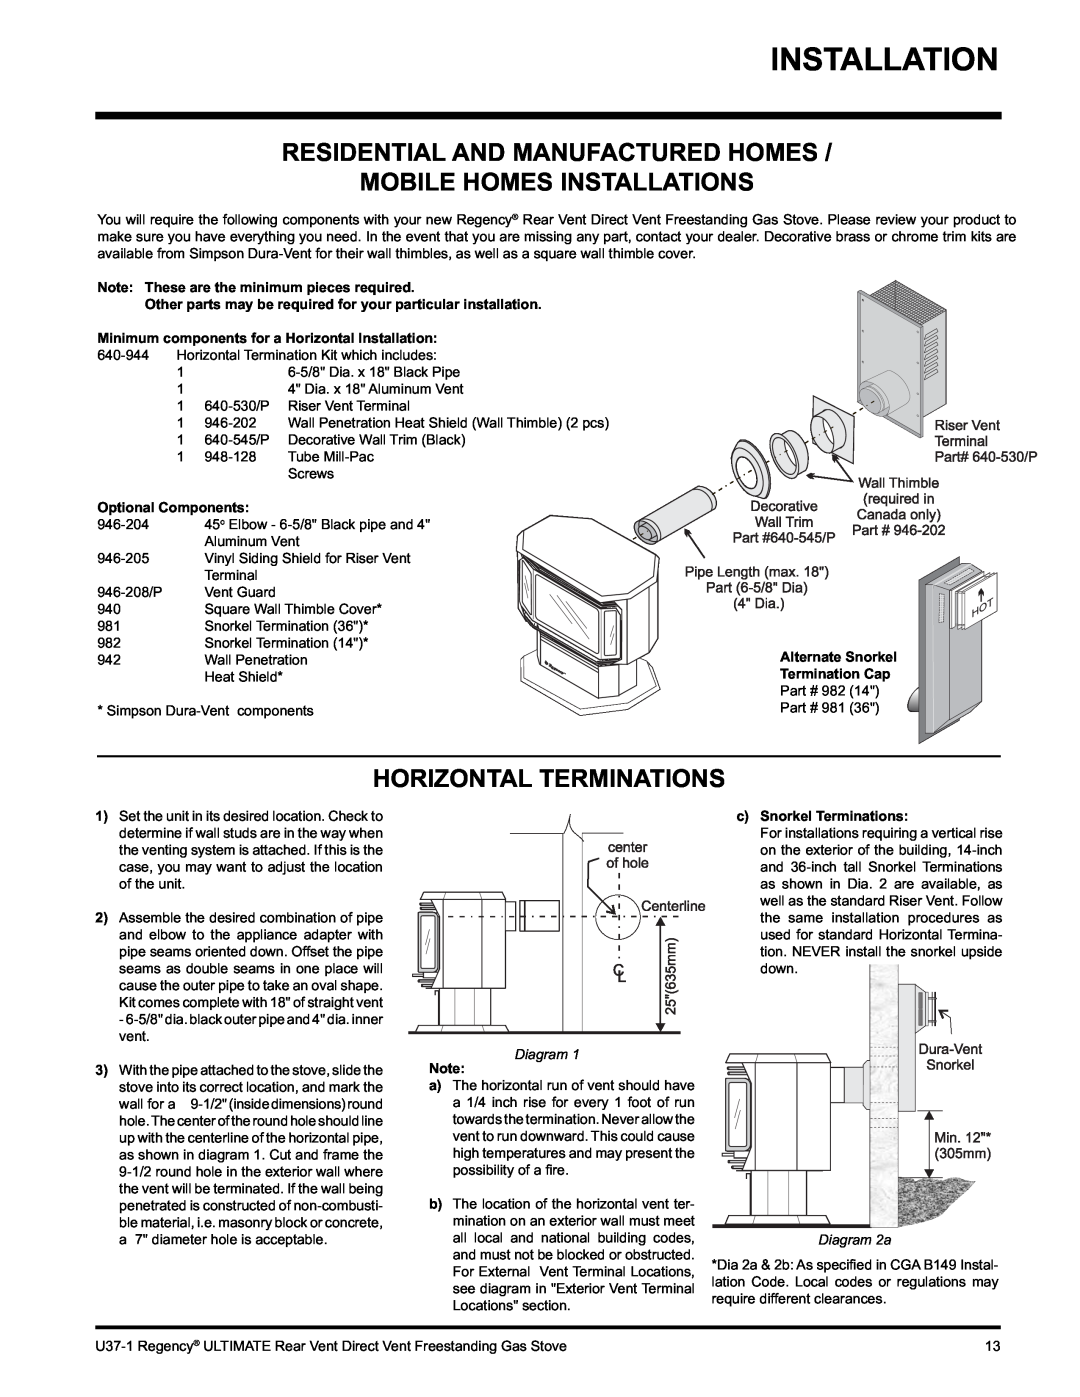 Regency U37-NG1, U37-LP1 Residential And Manufactured Homes, Mobile Homes Installations, Horizontal Terminations, Diagram 